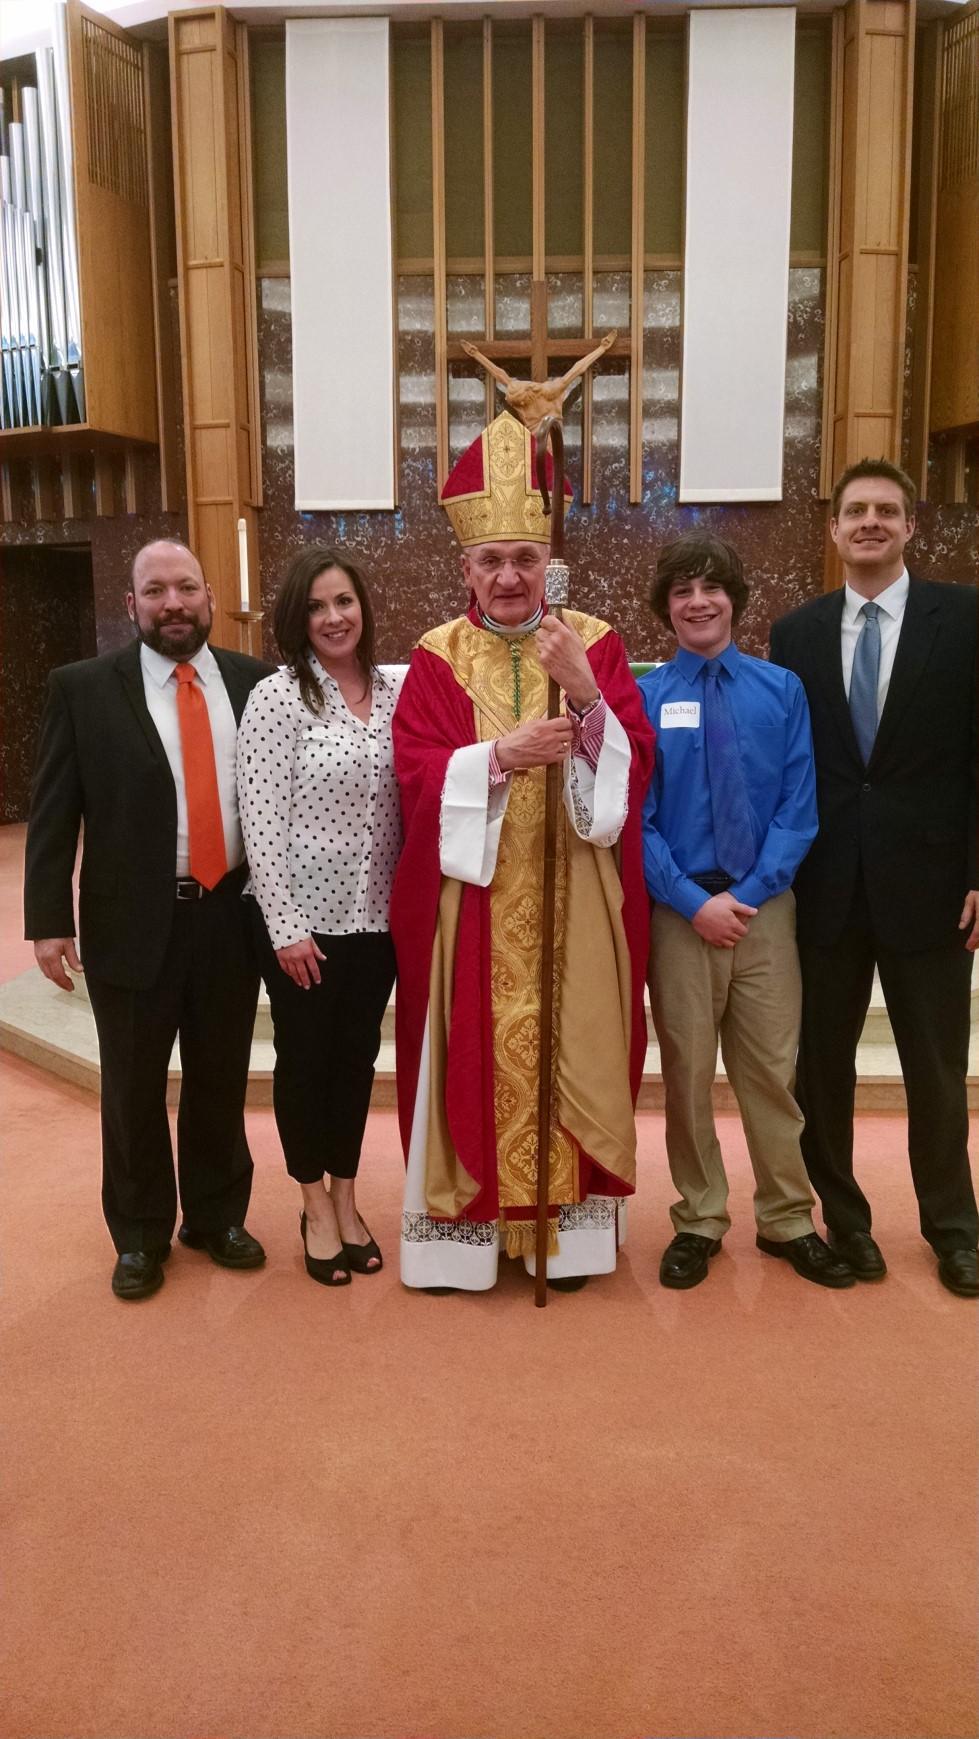 Tressa (Dorman) Denninger were united in marriage on January 16, 2016 Jack Noah received the Sacrament of Confirmation in the Catholic Church on February 7, 2016 We continue to pray for our families